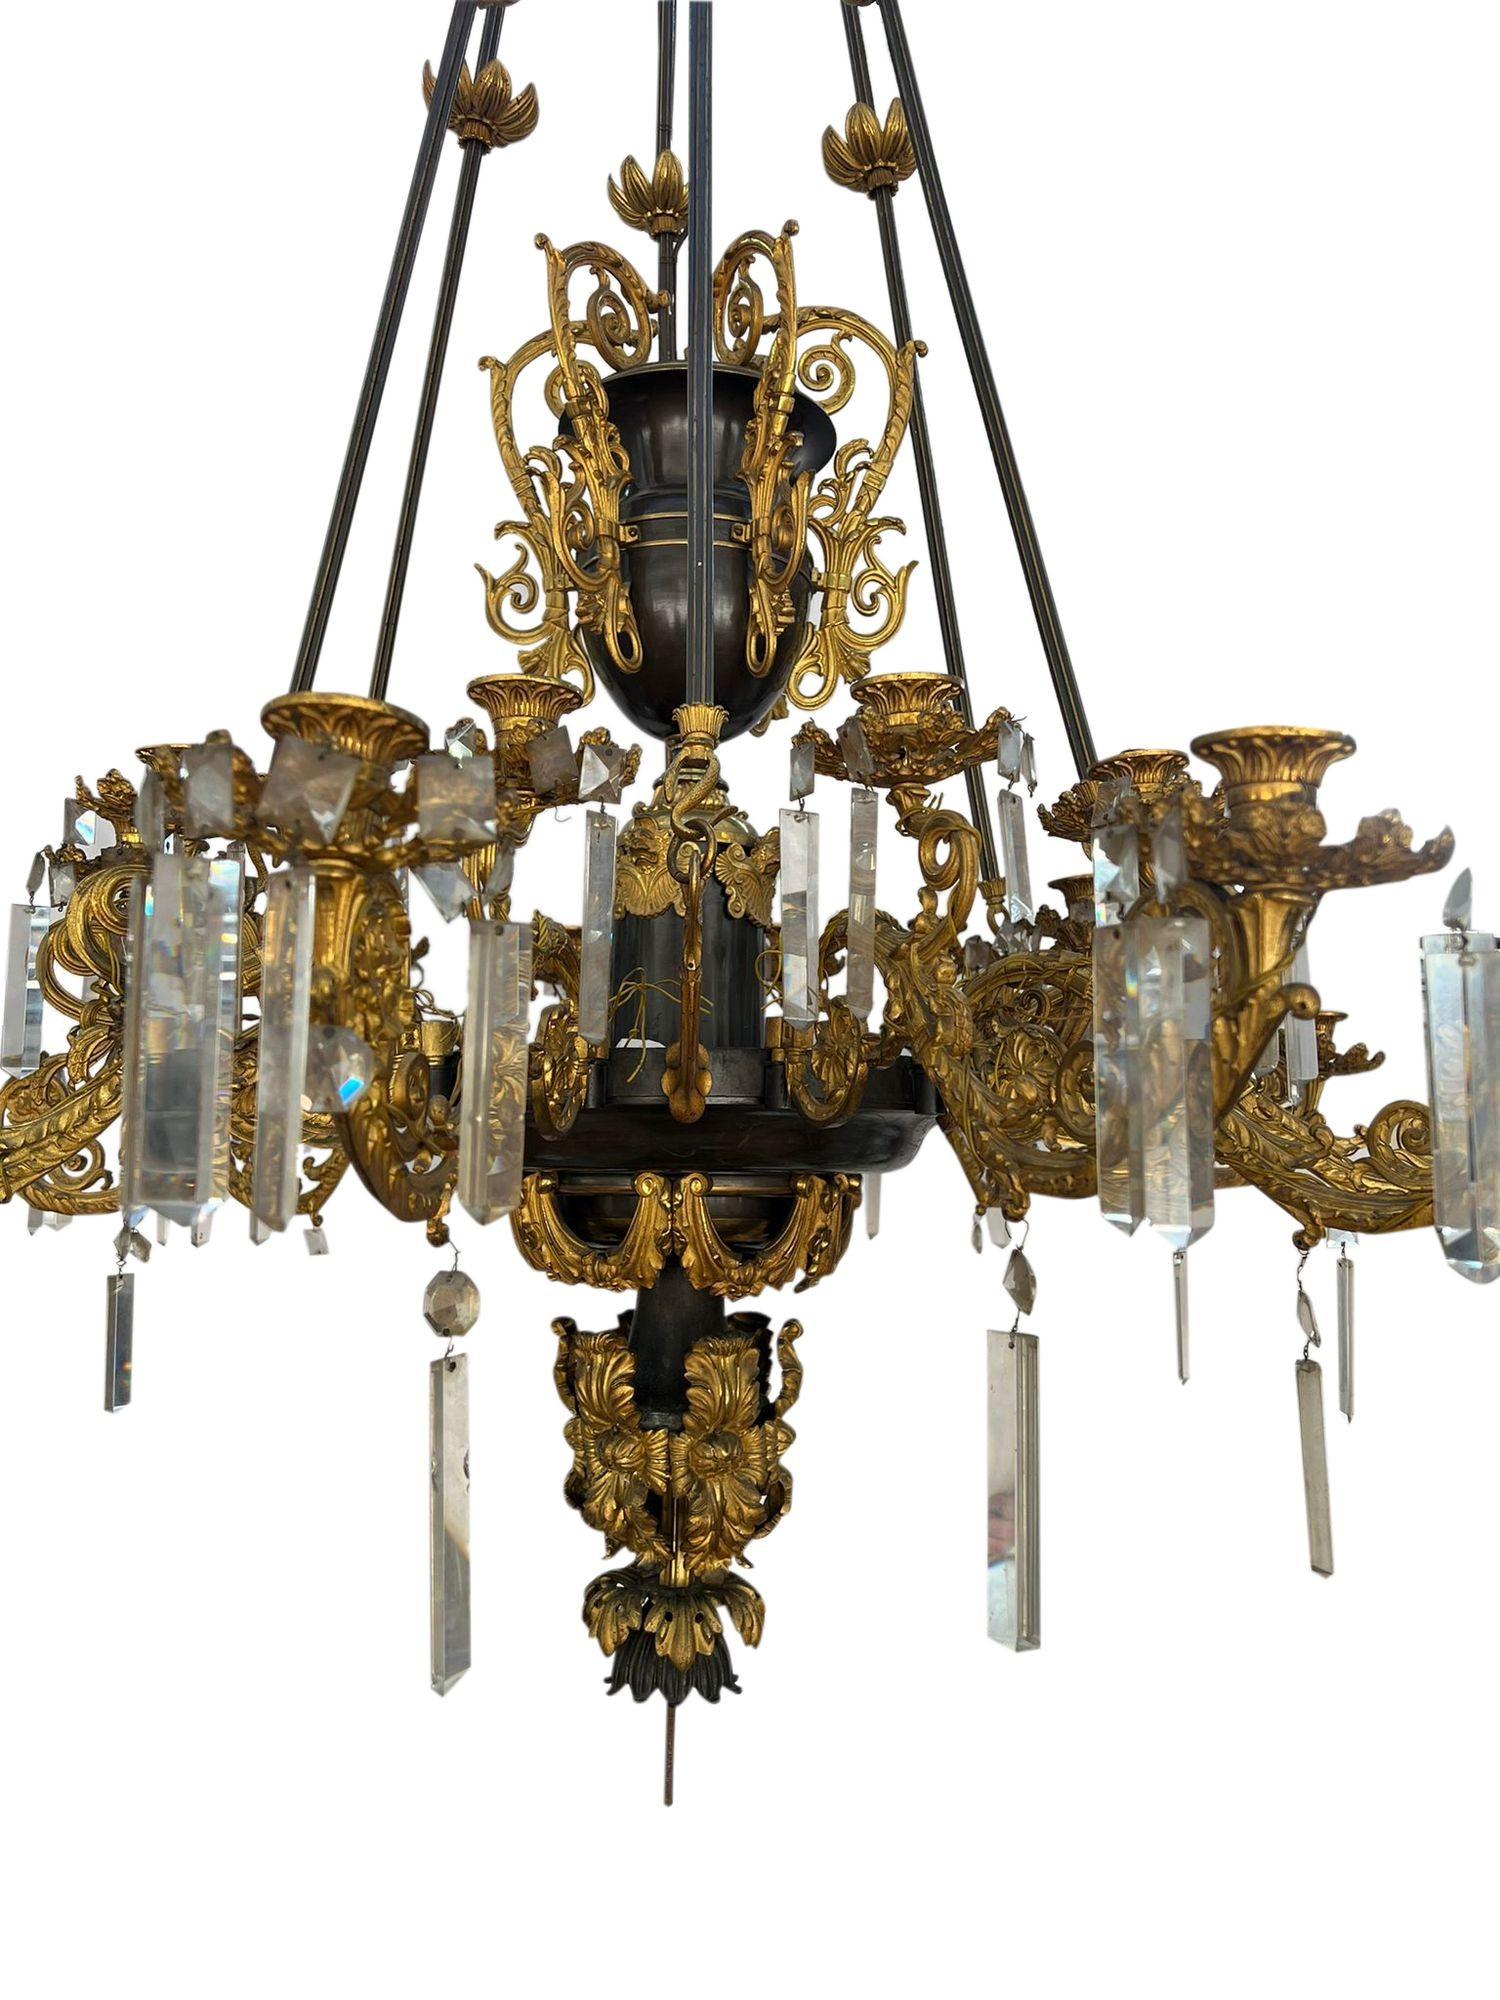 A large and impressive 19th Century bronze and gilded ormolu Louis XVI style 12 branch chandelier, having a central 5 handle urn, wonderful scrolling foliate branches with cut glass drops, ormolu swag and floral mounts, circa 1860.
 
 
Batch 73 